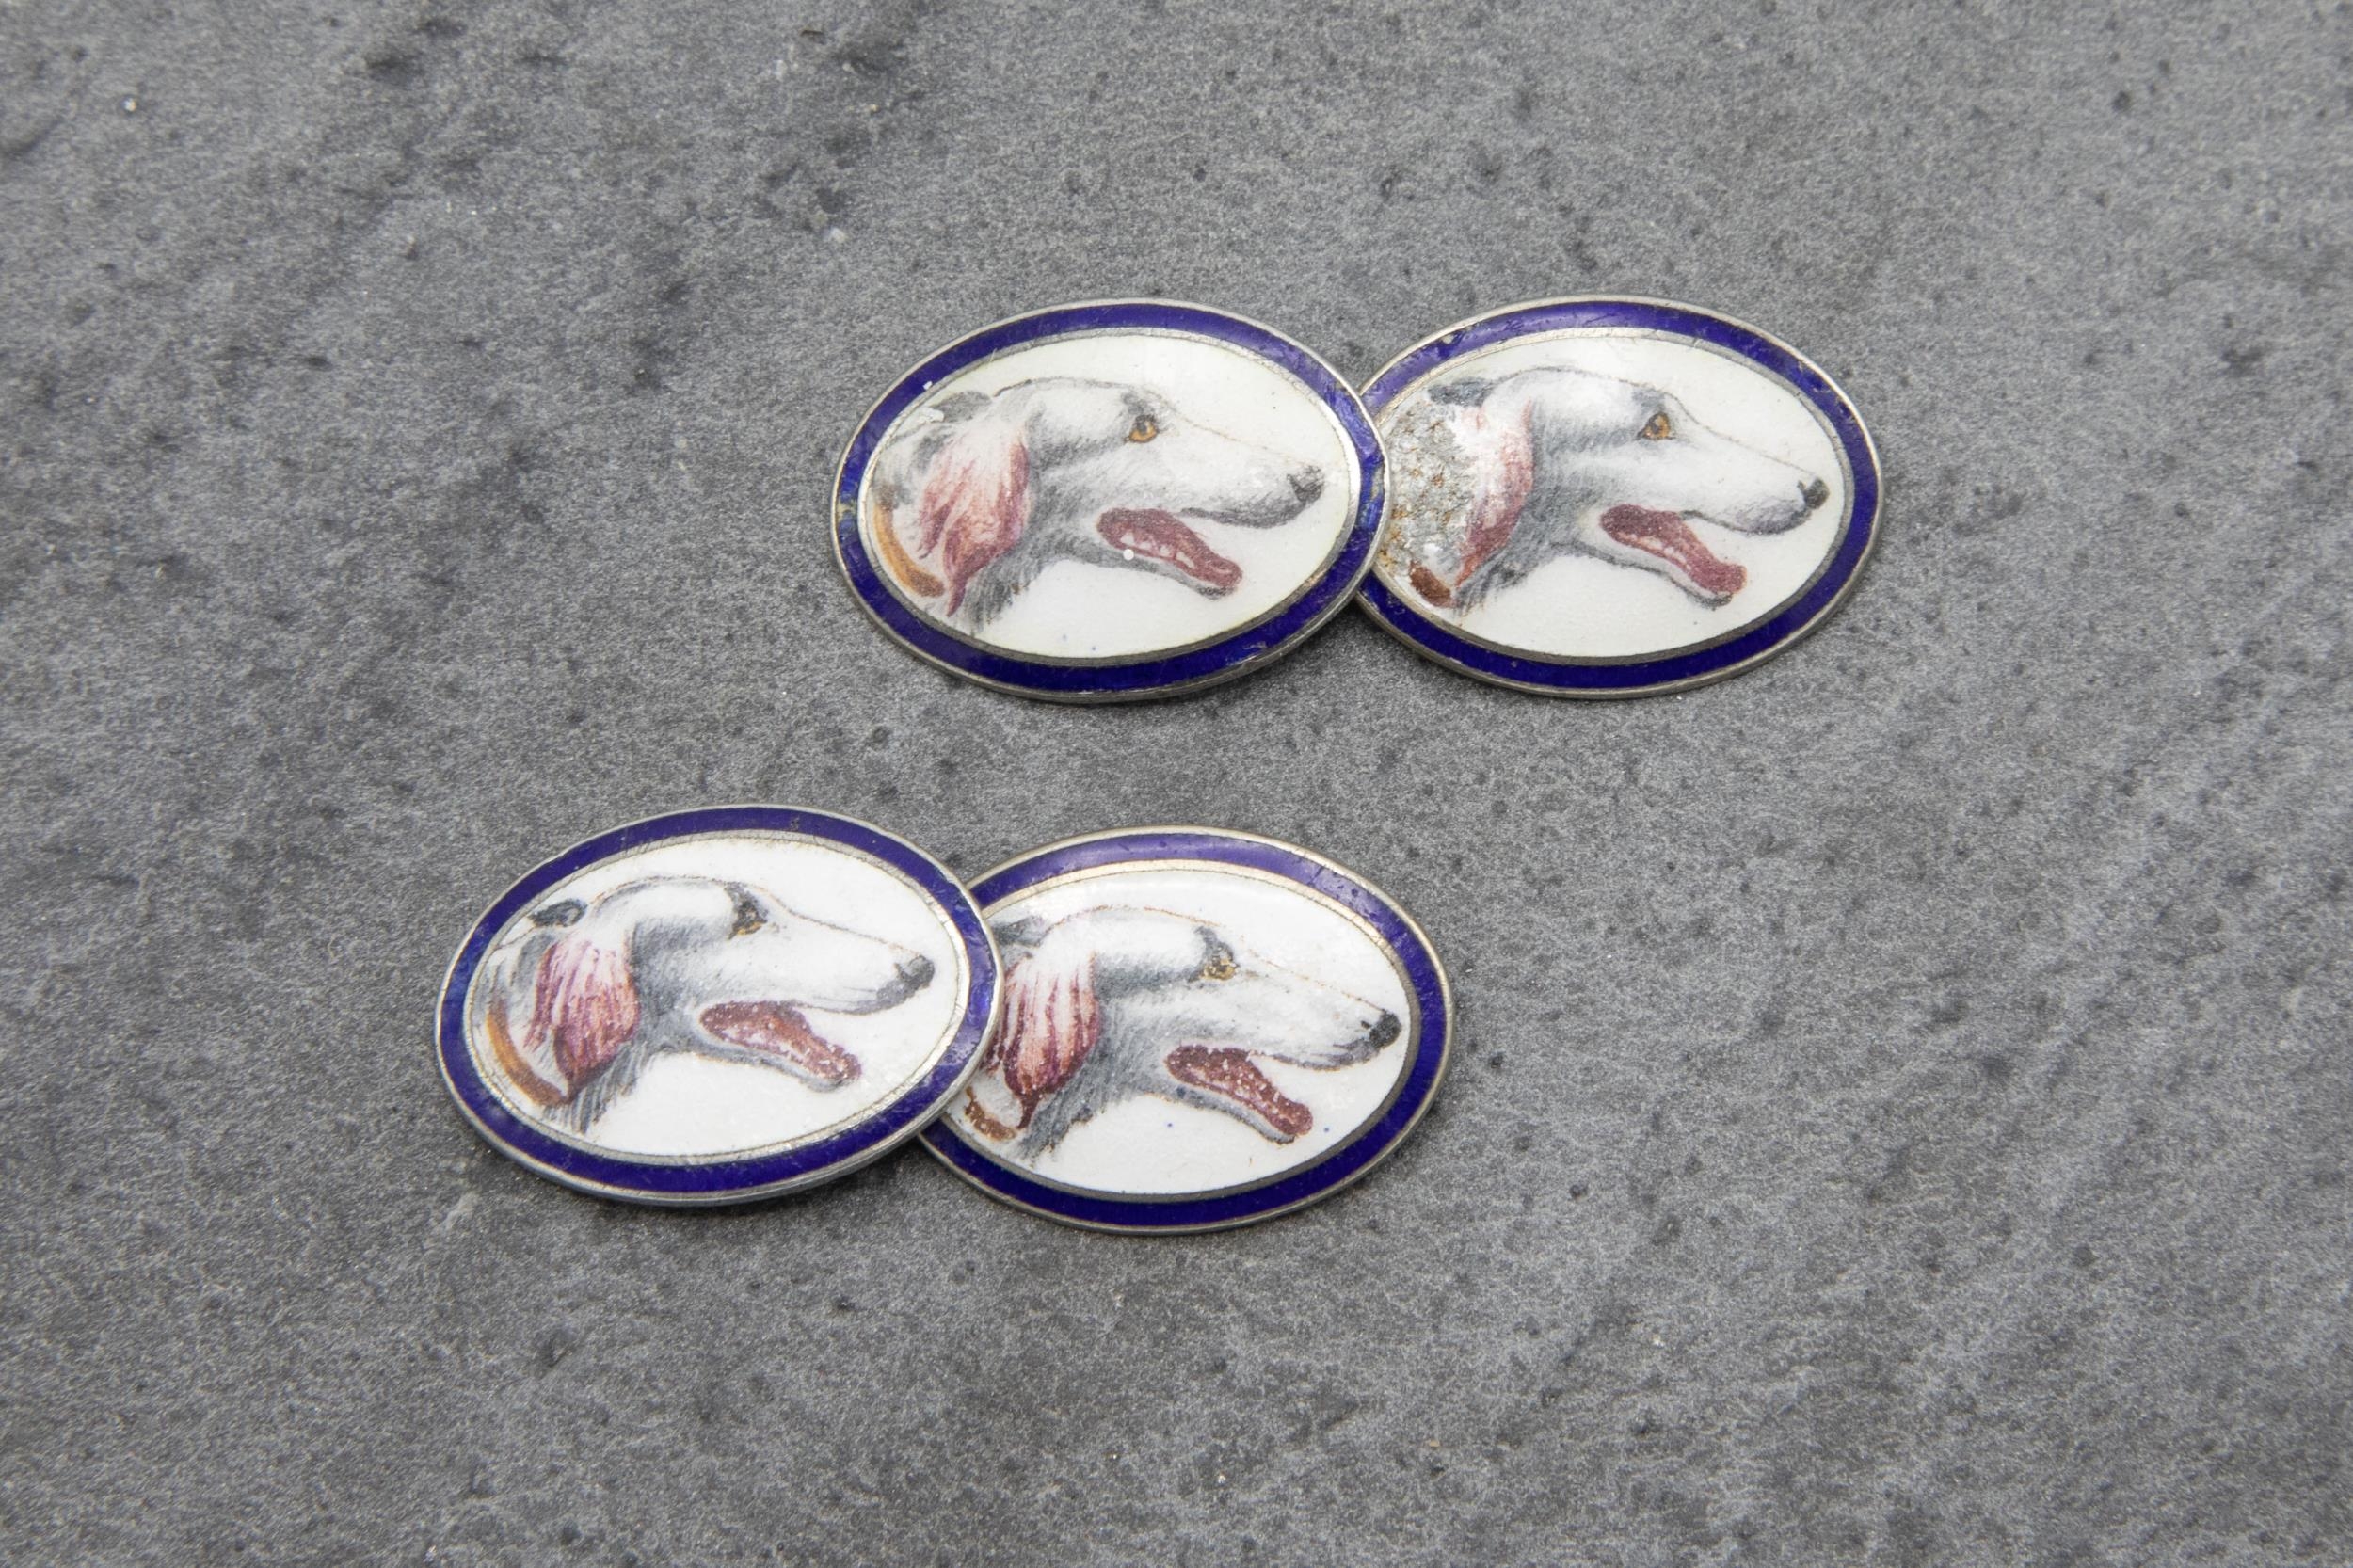 Set of white metal cufflinks enamelled with Afghan hound heads - Image 2 of 3